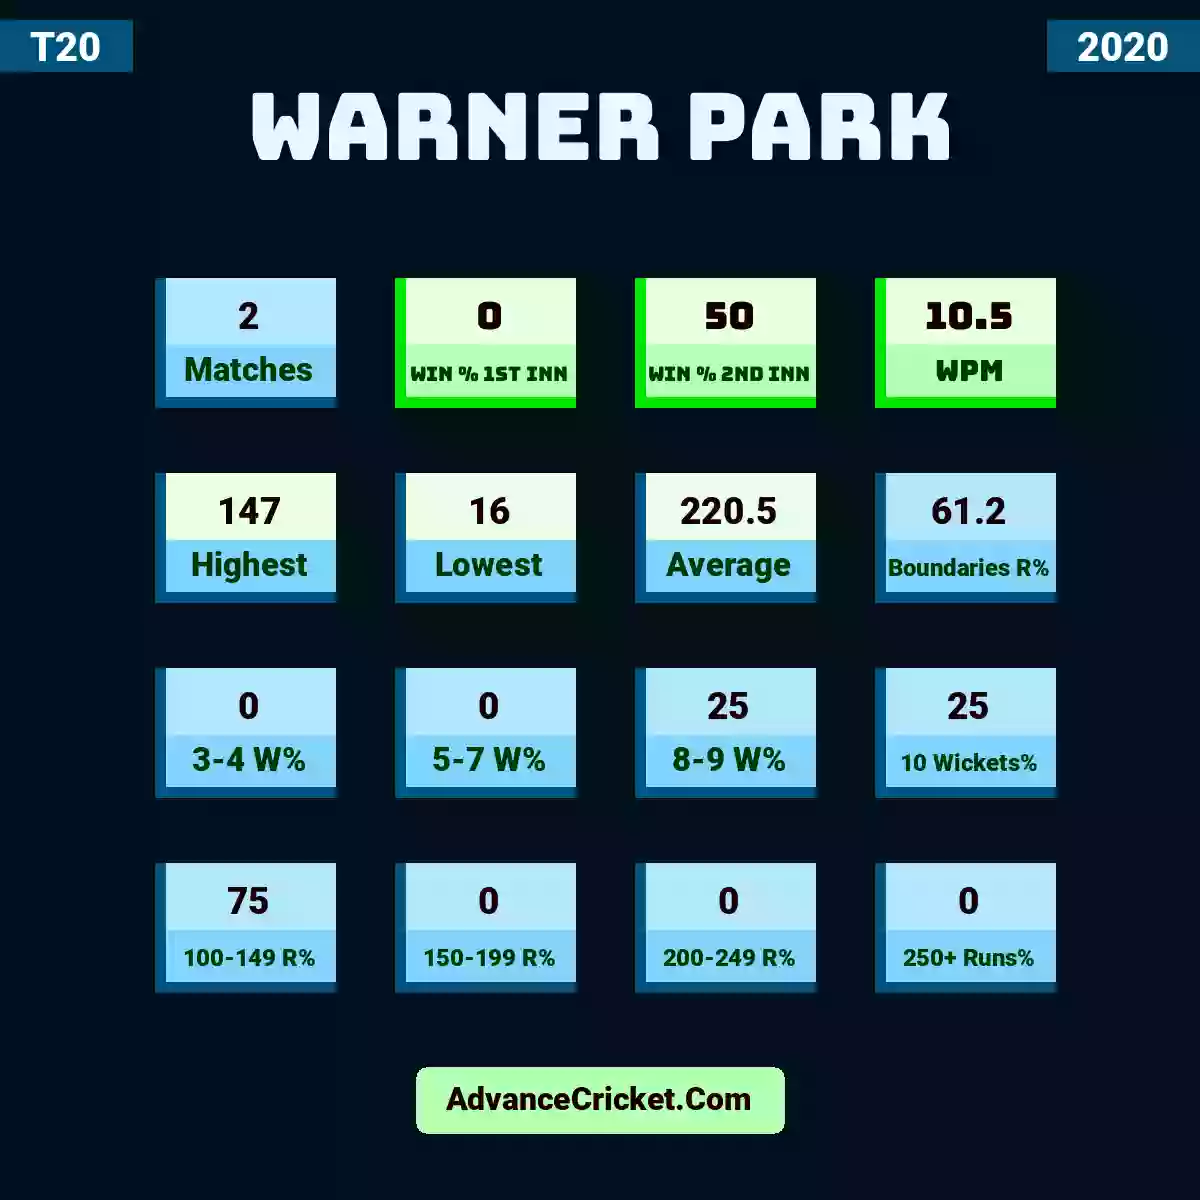 Image showing Warner Park with Matches: 2, Win % 1st Inn: 0, Win % 2nd Inn: 50, WPM: 10.5, Highest: 147, Lowest: 16, Average: 220.5, Boundaries R%: 61.2, 3-4 W%: 0, 5-7 W%: 0, 8-9 W%: 25, 10 Wickets%: 25, 100-149 R%: 75, 150-199 R%: 0, 200-249 R%: 0, 250+ Runs%: 0.